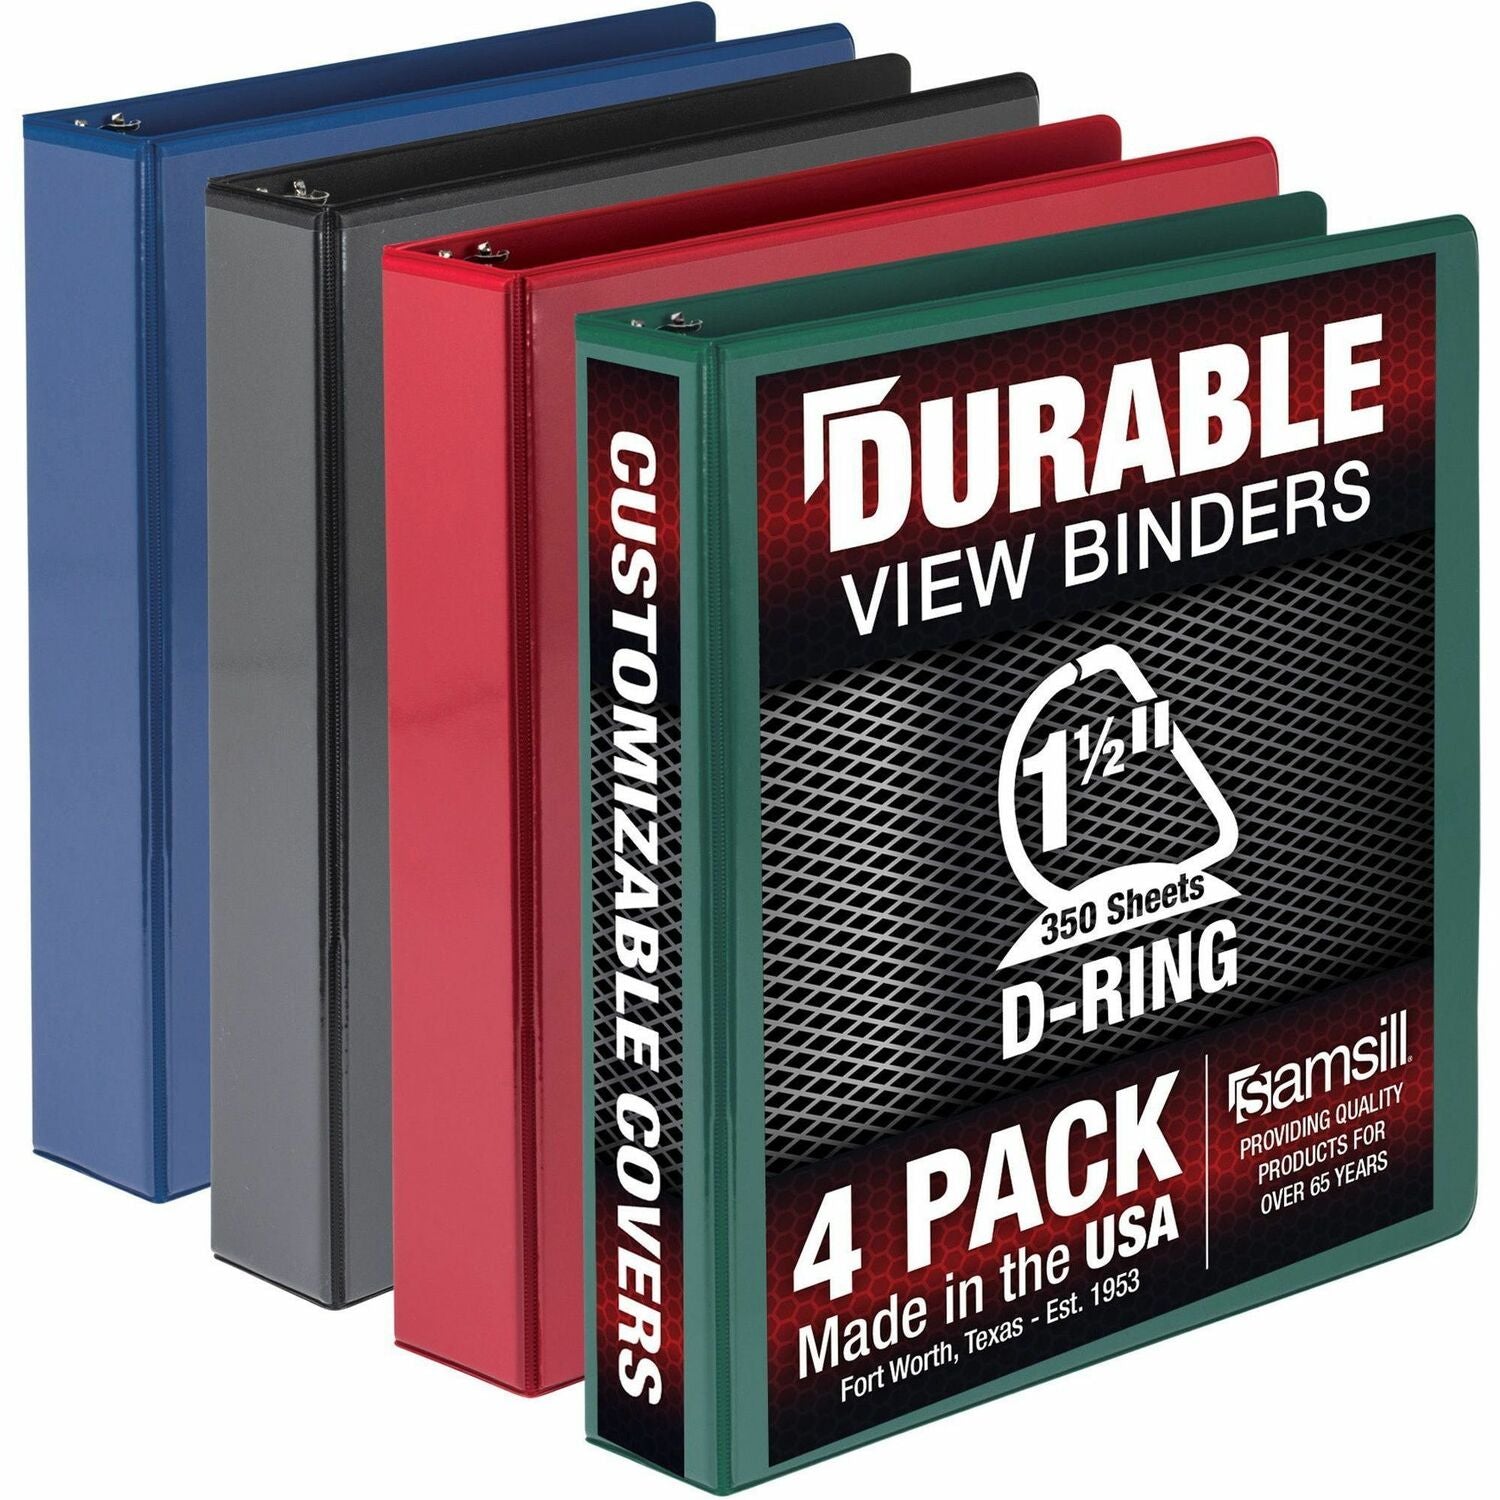 samsill-durable-view-binders-1-1-2-binder-capacity-letter-8-1-2-x-11-sheet-size-350-sheet-capacity-d-ring-fasteners-2-internal-pockets-chipboard-polypropylene-assorted-recycled-clear-overlay-durable-non-glare-pvc-free_sammp46458 - 1